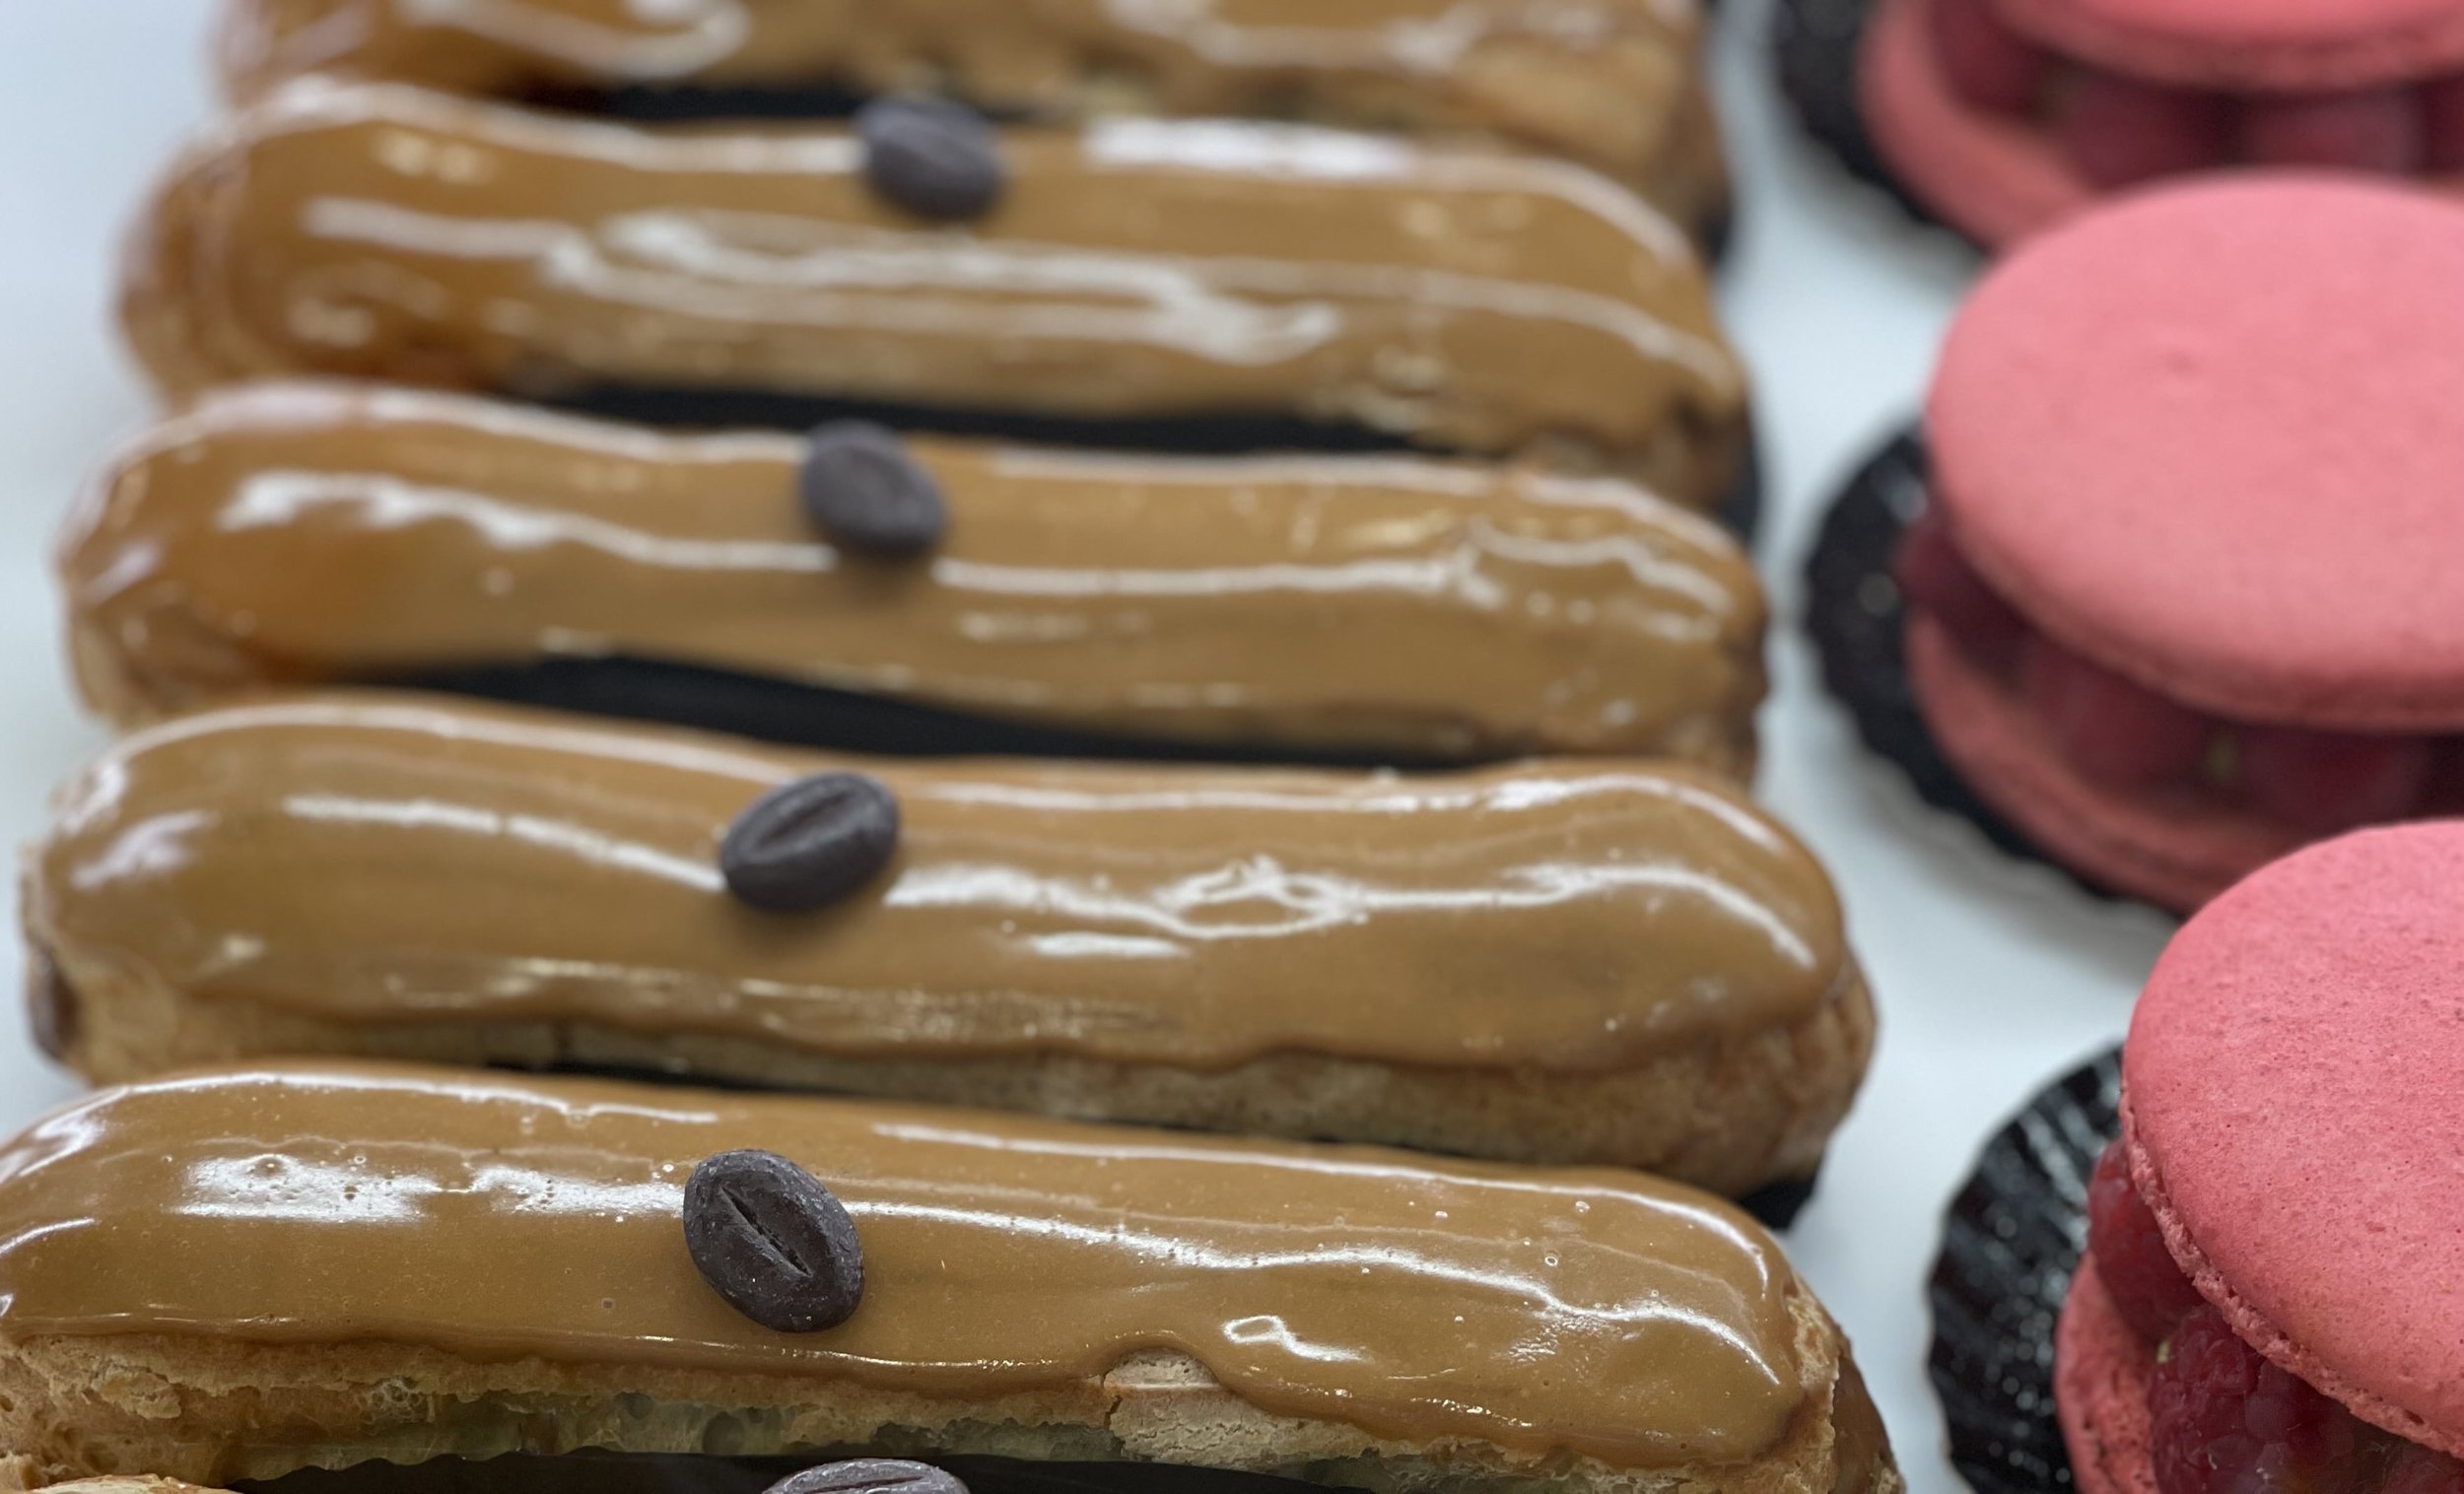 A twist on the famous French pastry, these Eclairs are coffee flavored.